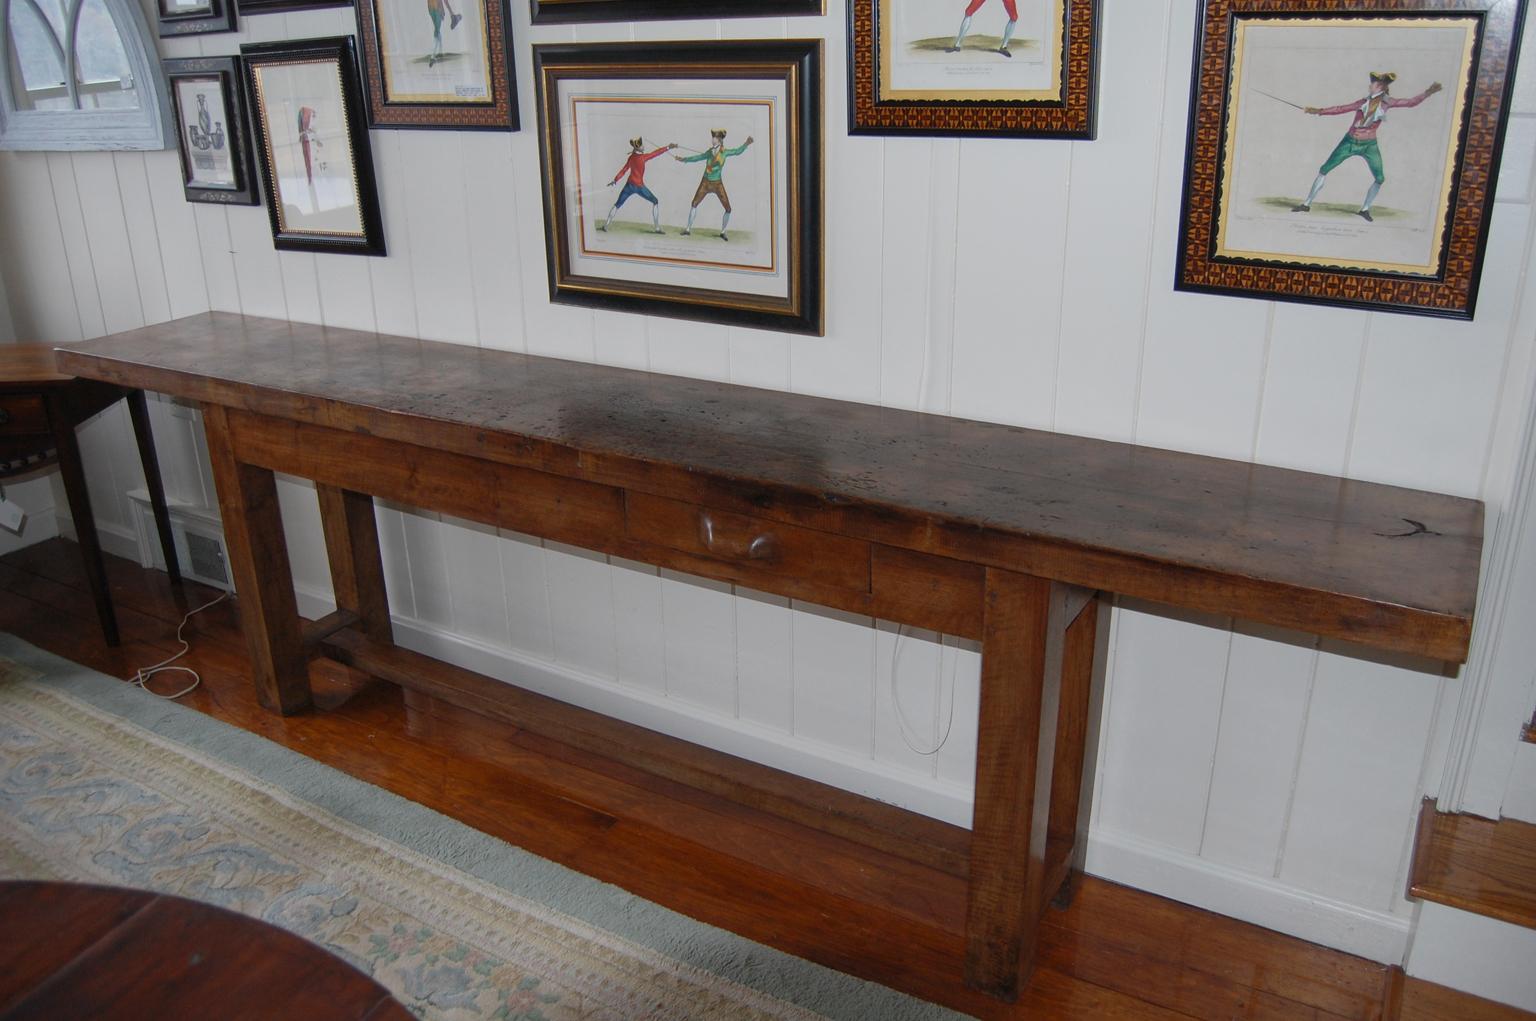 French provincial shoemaker's table or workbench from the Burgundy region of France. This beech wood workbench has a single thick beech removable top, and hunky beech square legs and H stretcher. The one drawer has an integrally carved handle. This